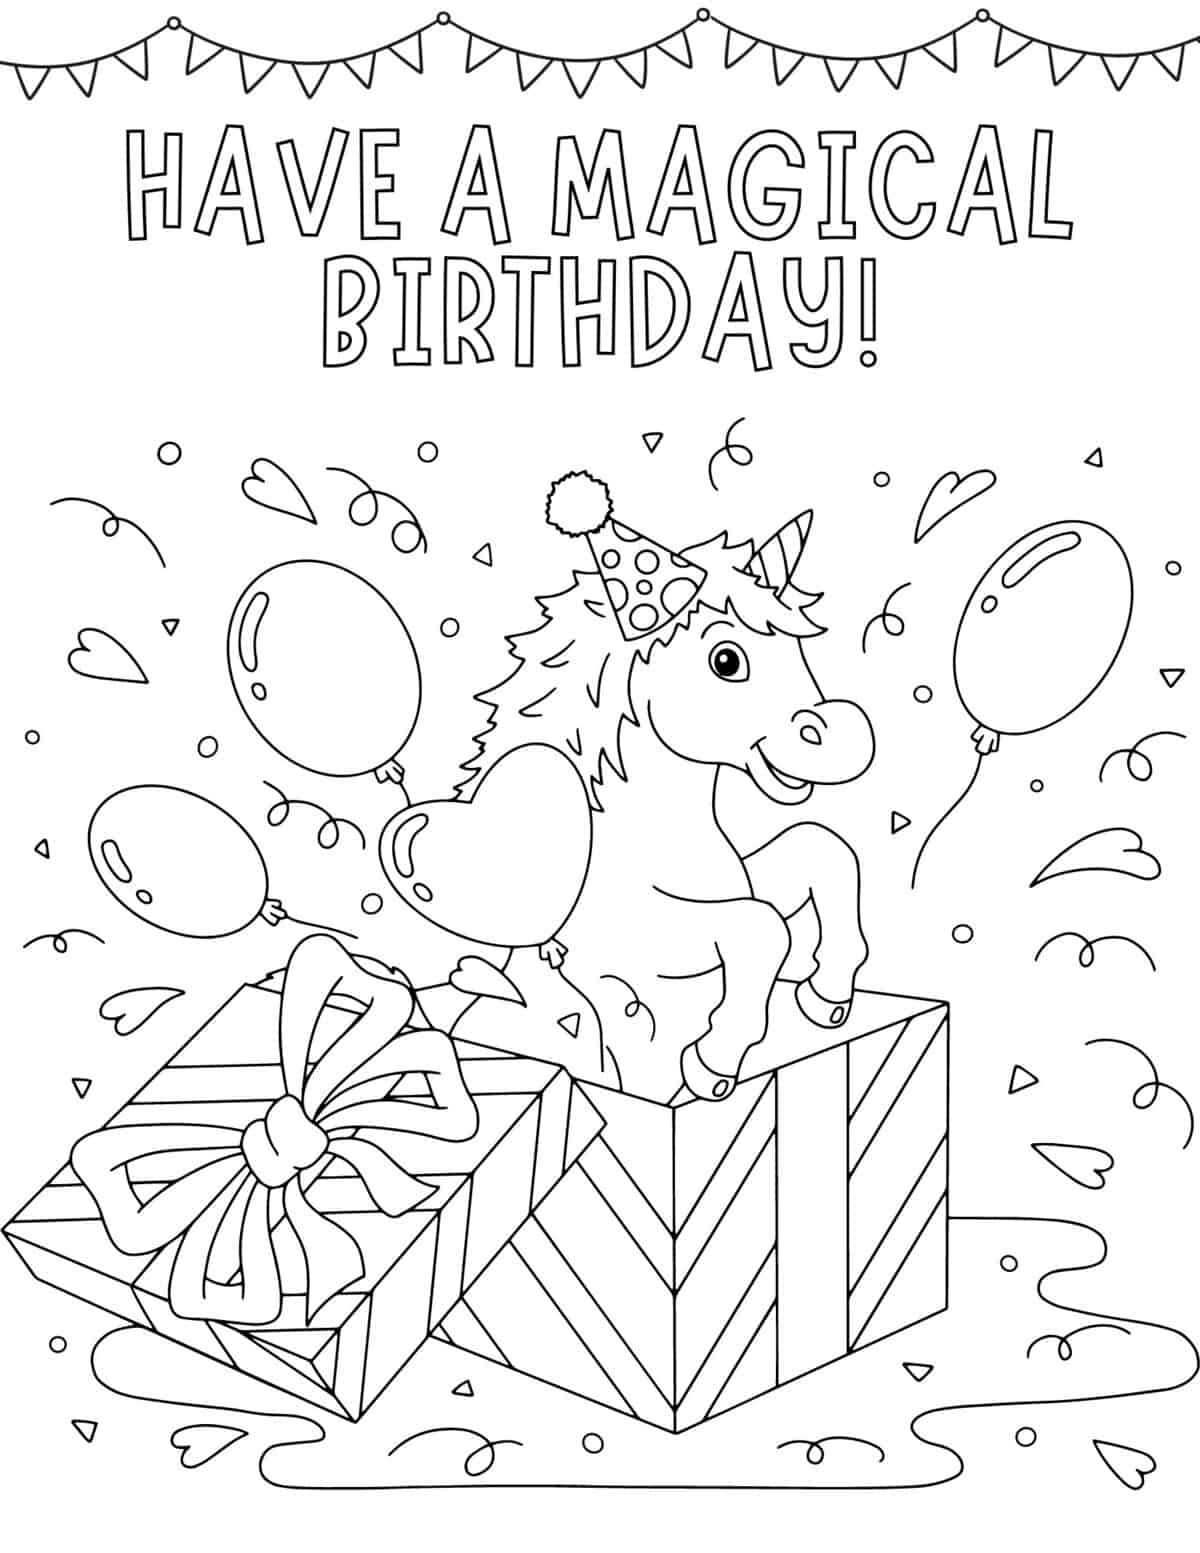 unicorn jumping out of birthday present